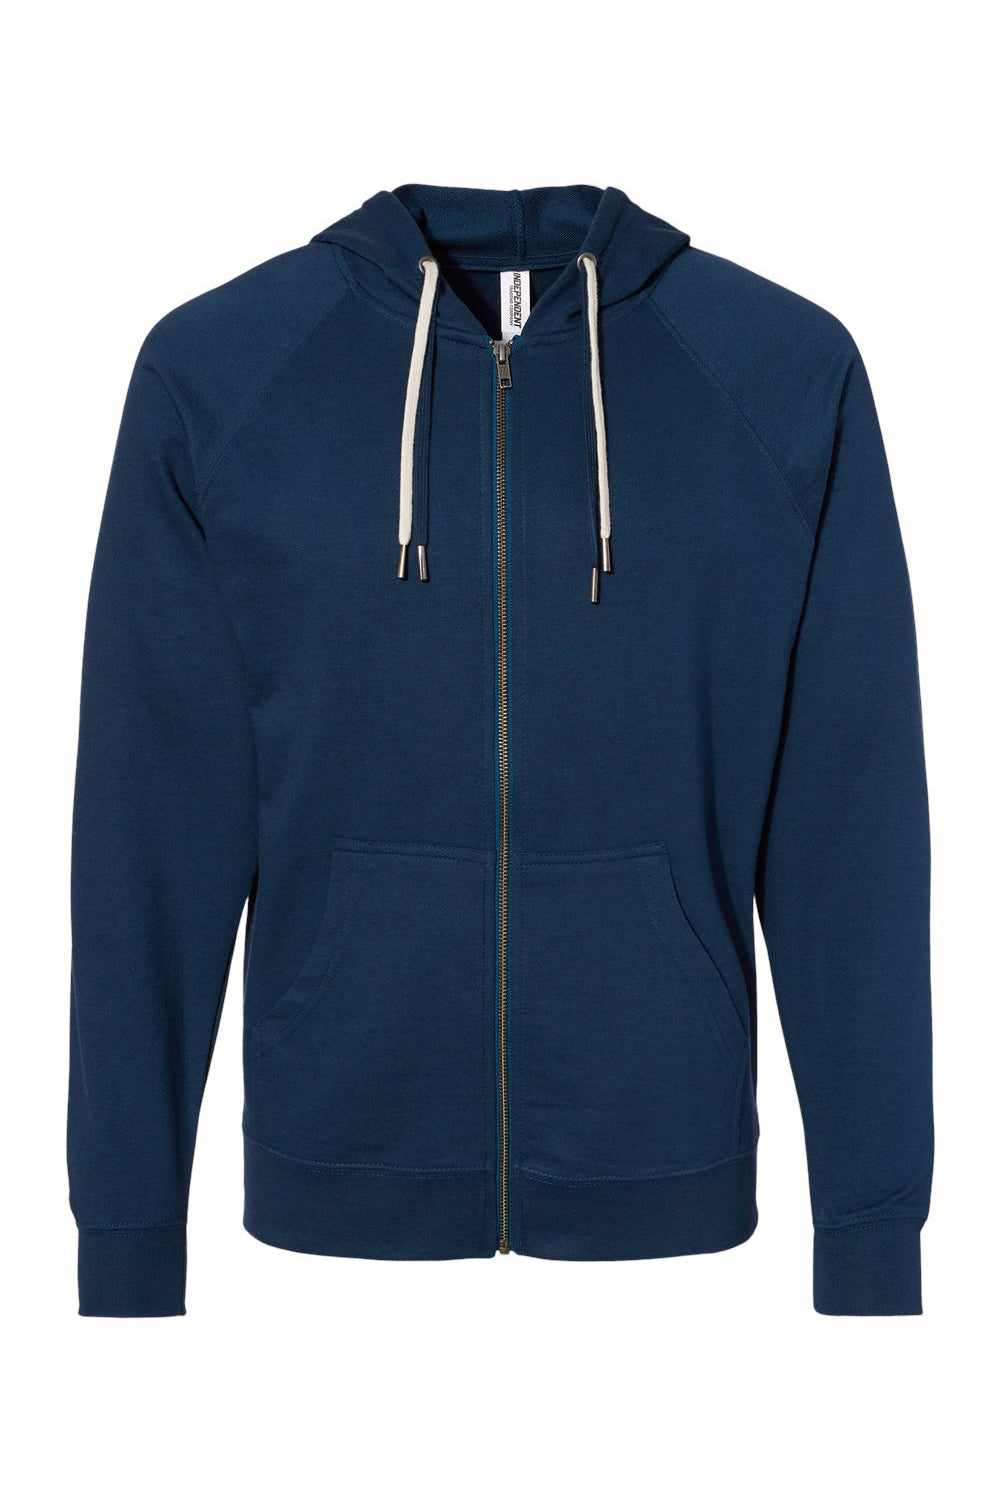 Independent Trading Co. SS1000Z Mens Icon Loopback Terry Full Zip Hooded Sweatshirt Hoodie Indigo Blue Flat Front